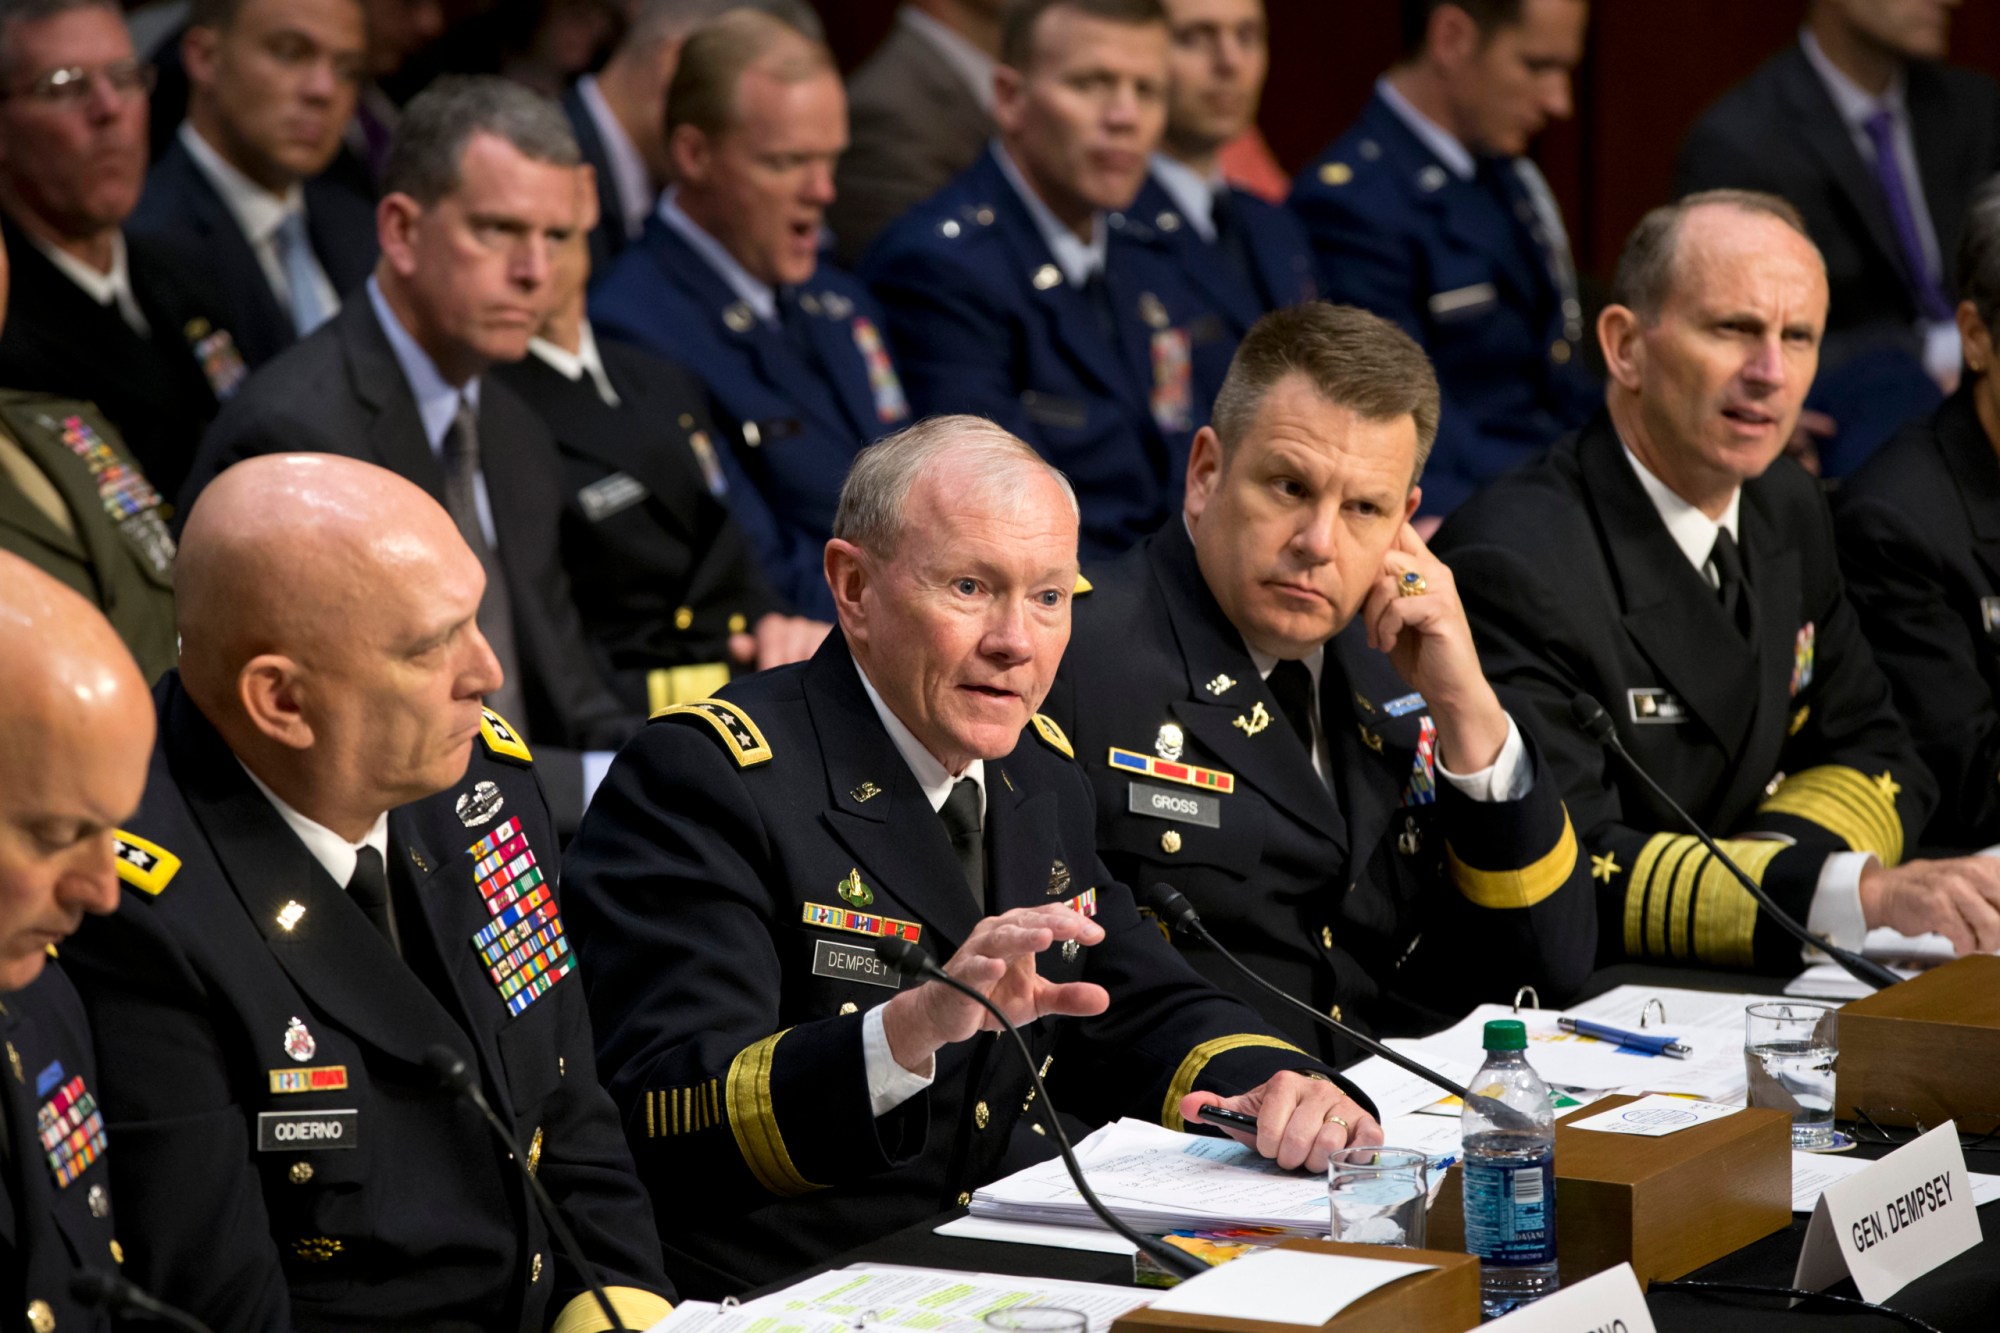 Joint Chiefs Chairman Gen. Martin Dempsey testifies before the Senate Armed Services Committee hearing on pending legislation regarding sexual assaults in the military. (AP/J. Scott Applewhite)